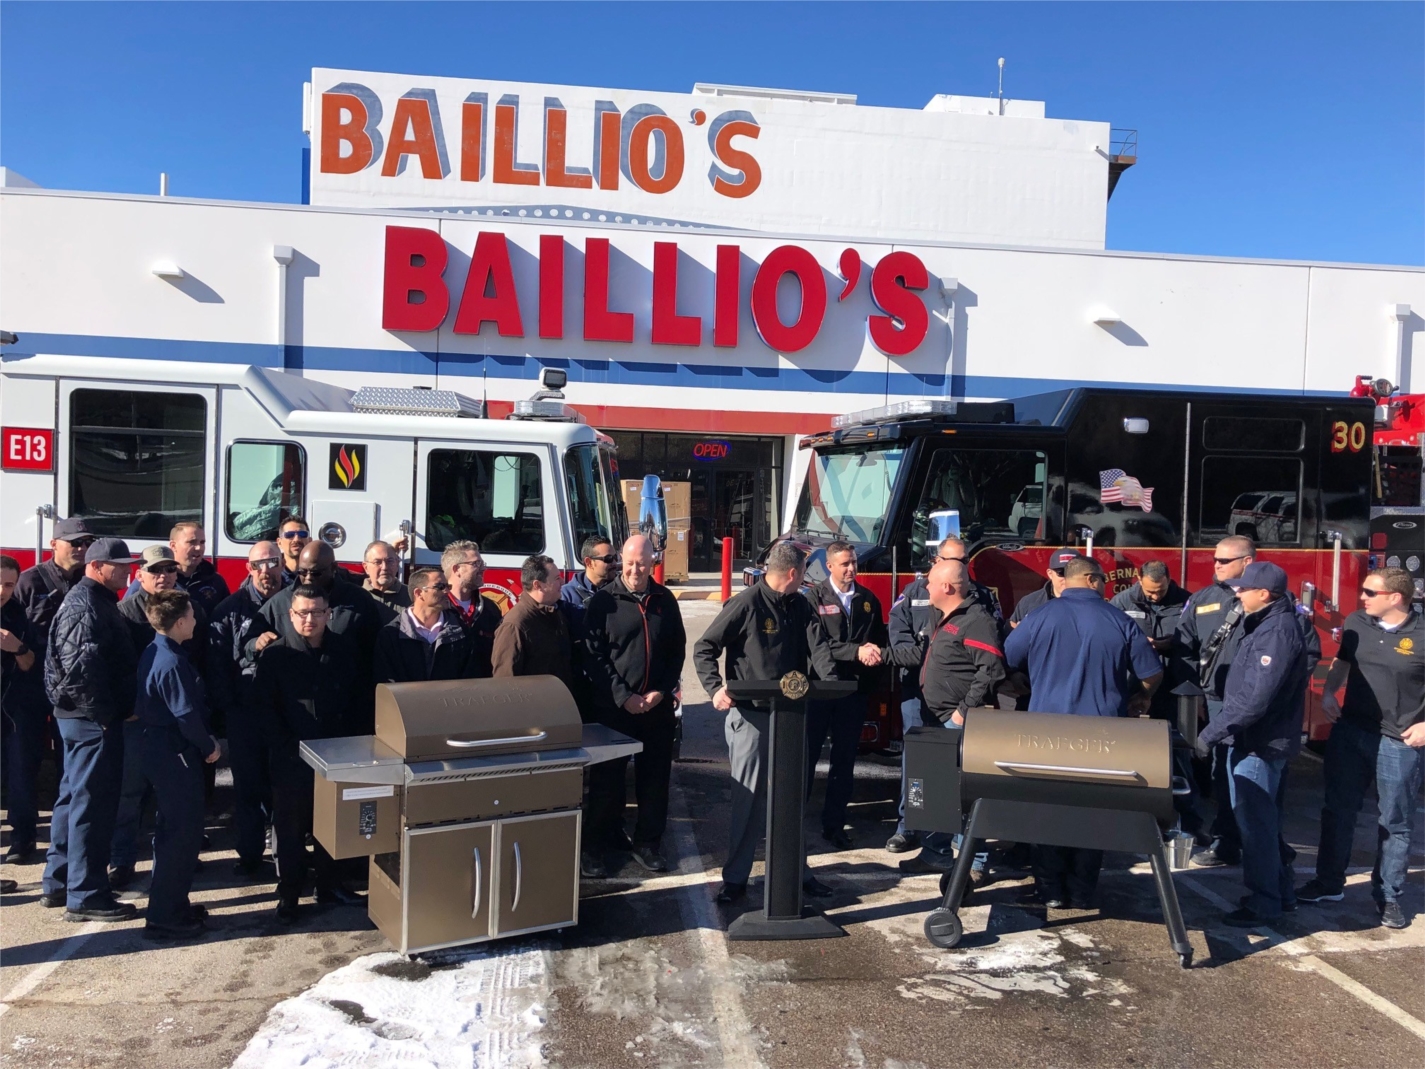 Baillio's provided Traeger BBQ/Smokers to each City of Albuquerque and Bernaillio County Fire Station the goal to assist them with their daily cooking needs. Often times they start cooking a meal, only to get a call and need to respond. In many cases, the food being cooked is wasted by the time they return to the station. The Traeger Grill is a low temp, slow cook process. Set it & forget it, Traeger makes cooking simple and hopefully we make the process easier for our first responders!